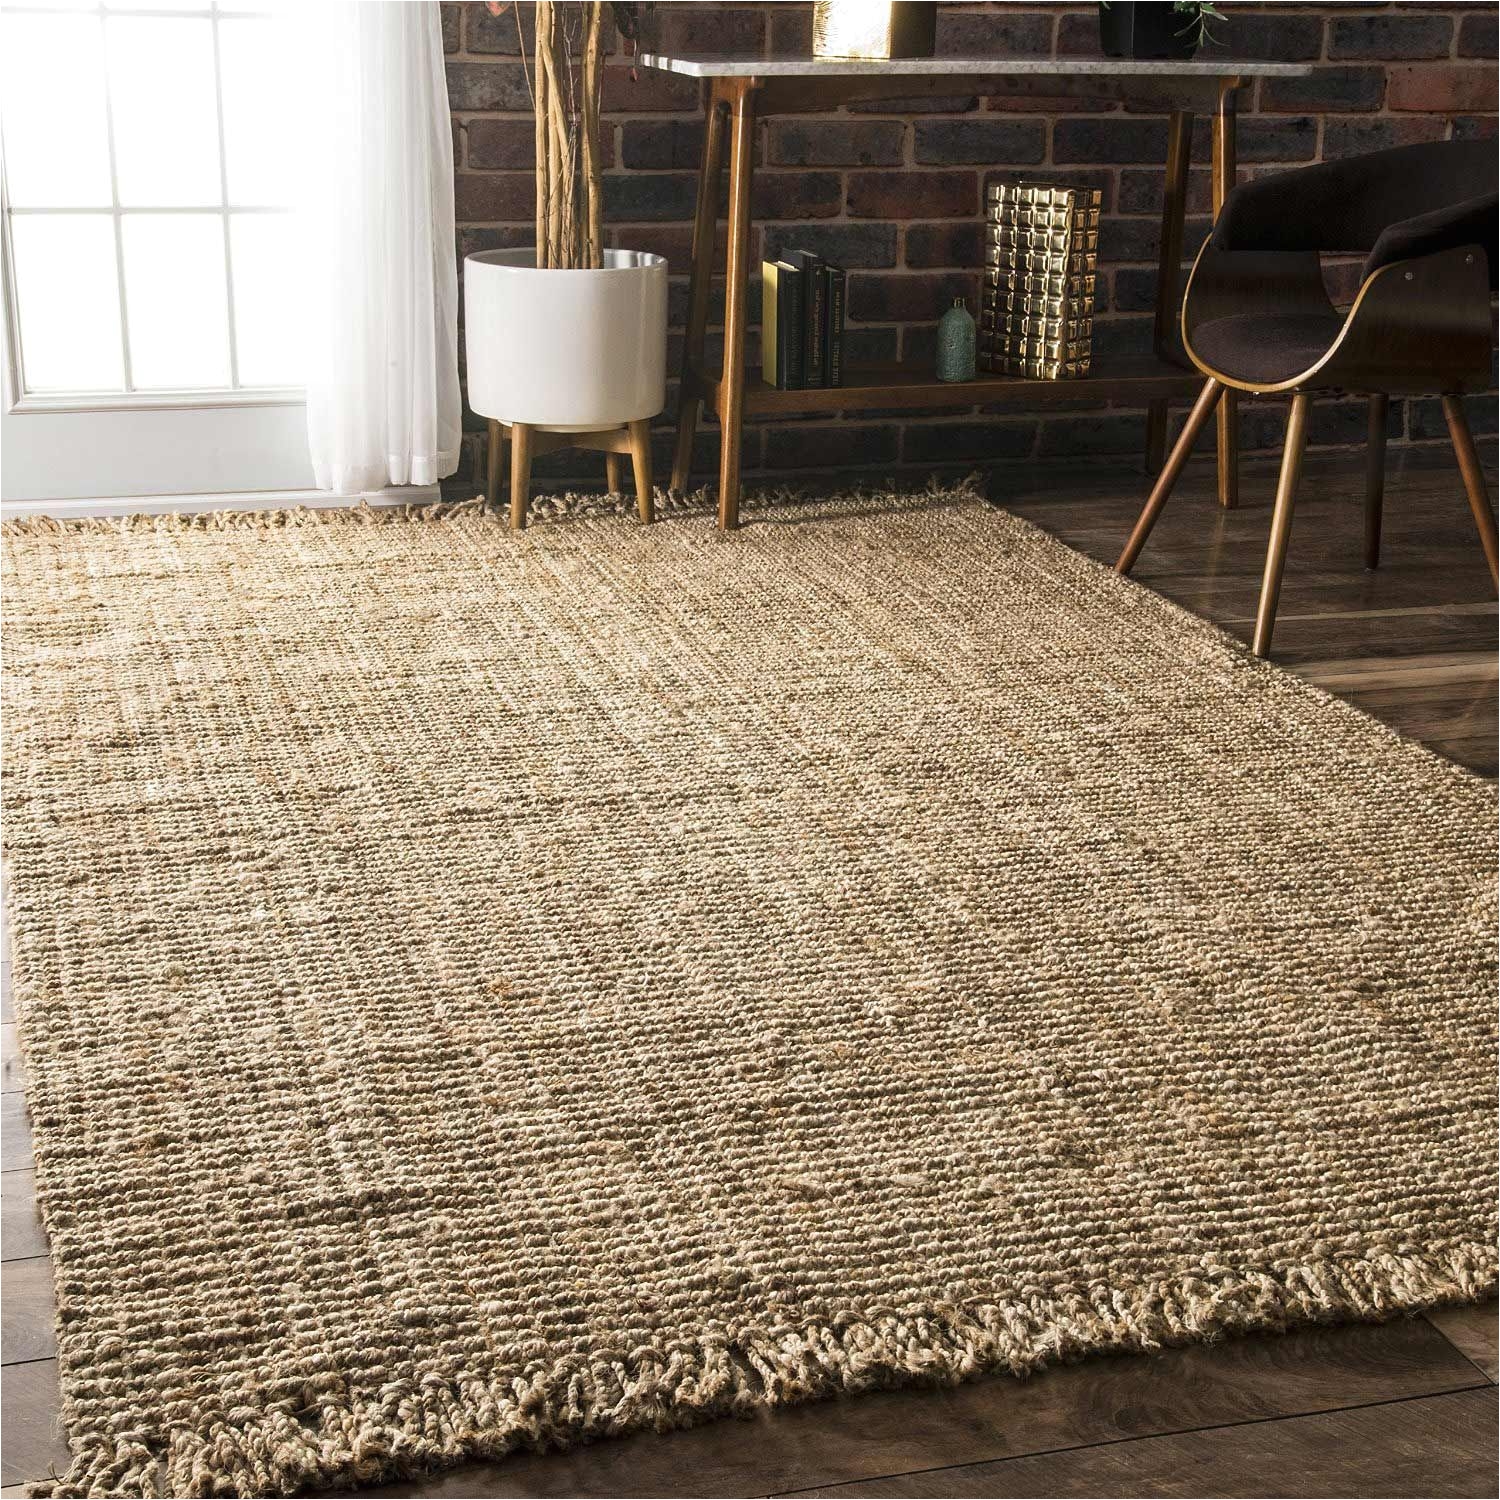 the durable fibers of the artisan crafted natural fiber chunky jute rug from nuloom make it ideal for placement in high traffic areas